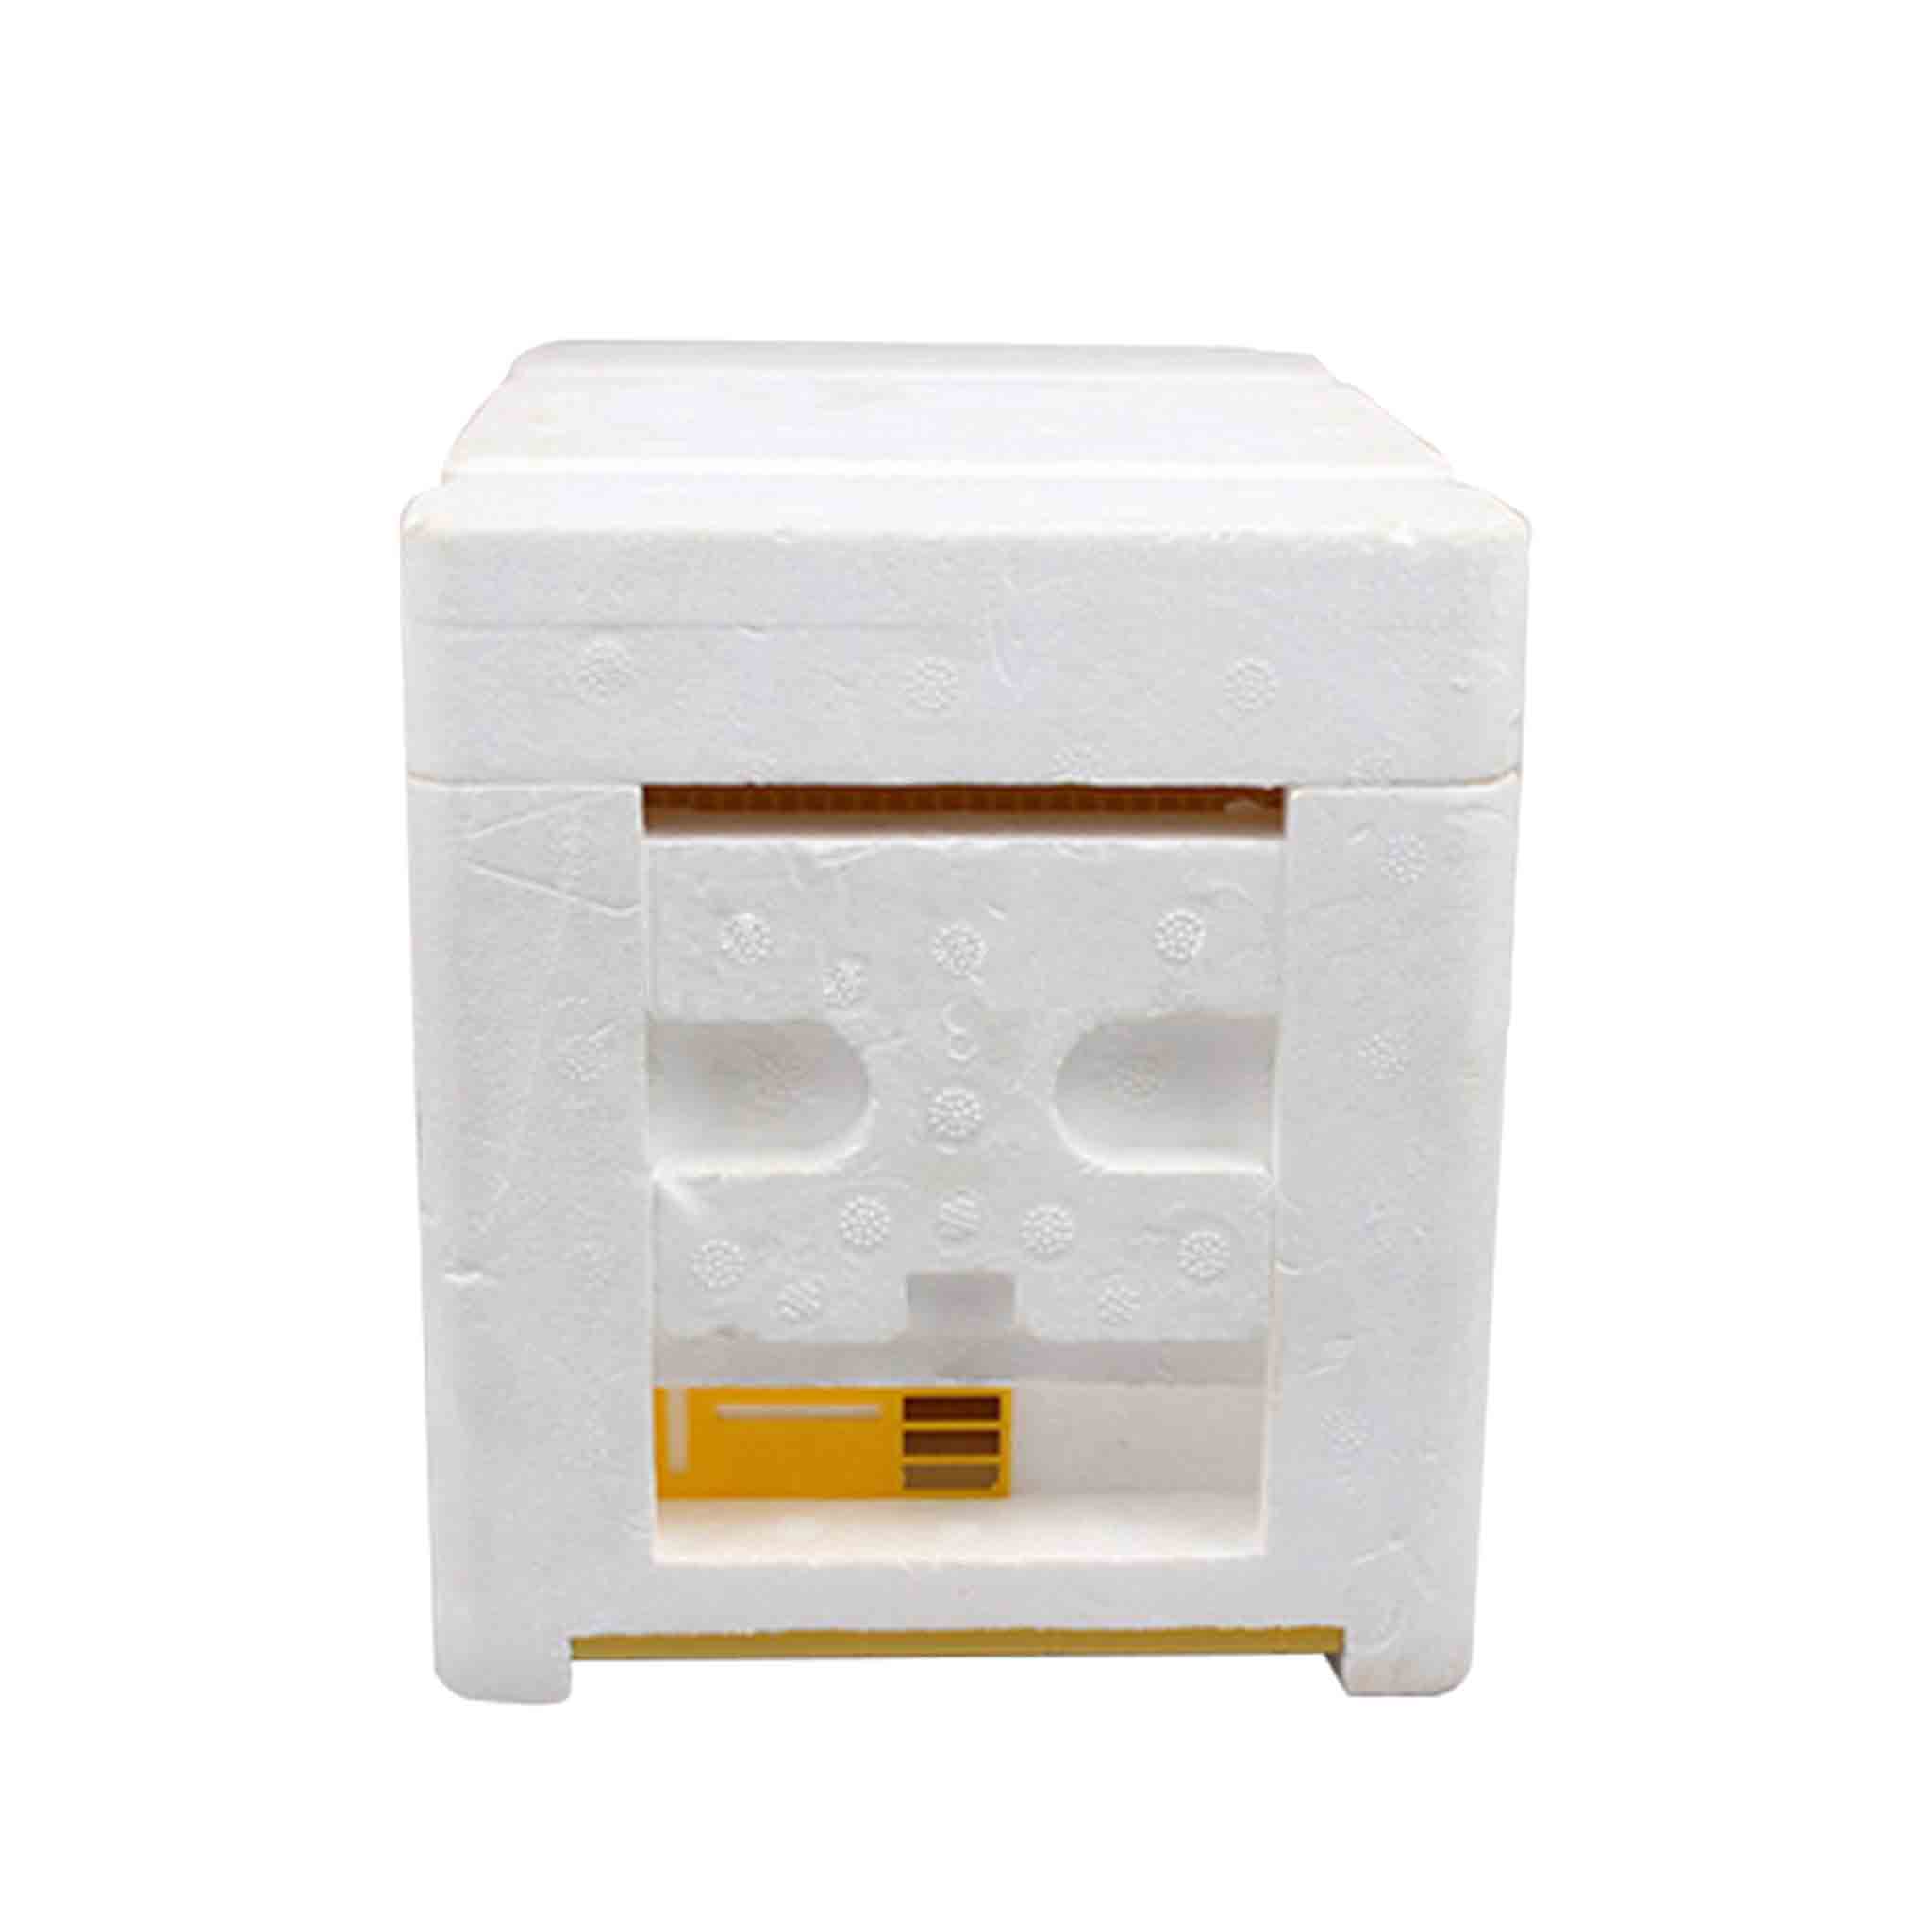 Mini Mating NUC Box (2 Pack) - Hives collection by Buzzbee Beekeeping Supplies